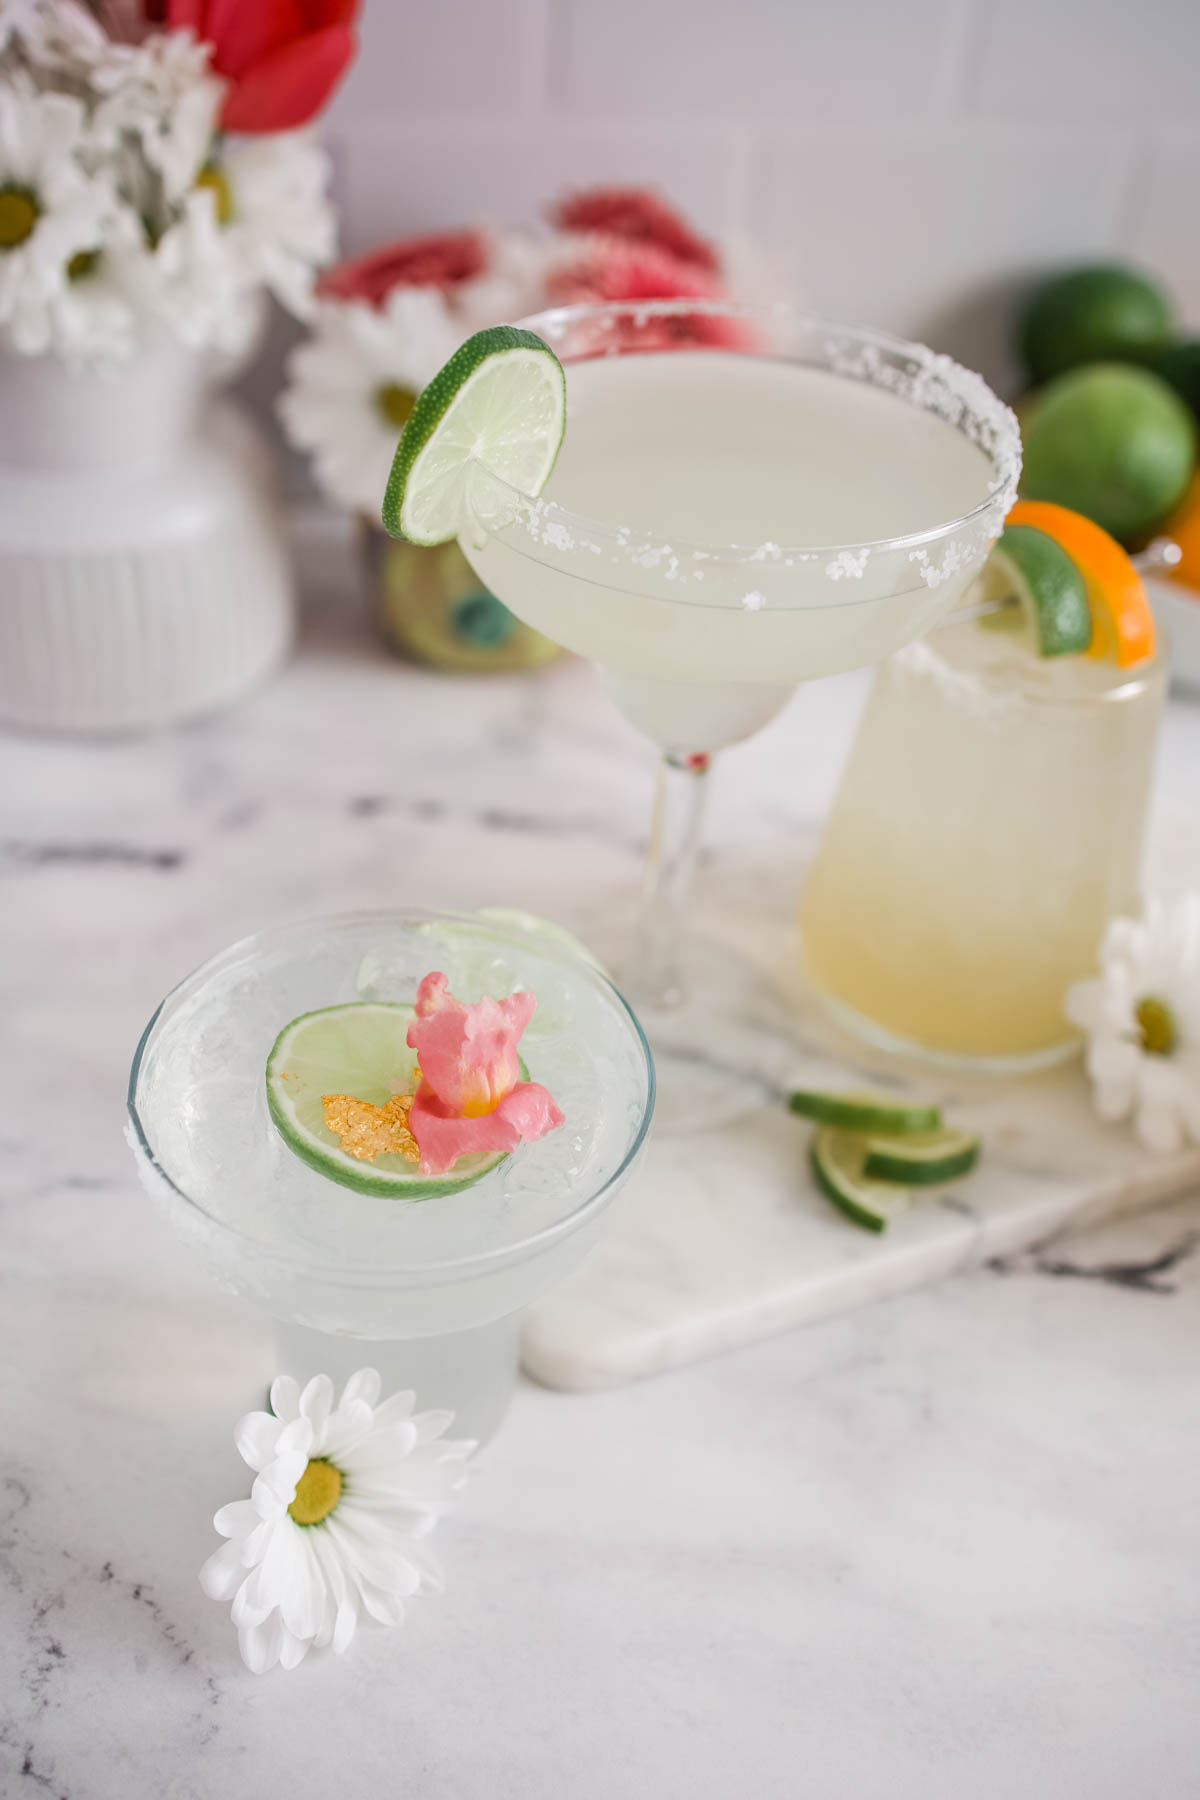 A margarita glass with a lime wedge on the side and a sugar rim, another glass with a slice of lime and pink flower petals on top.